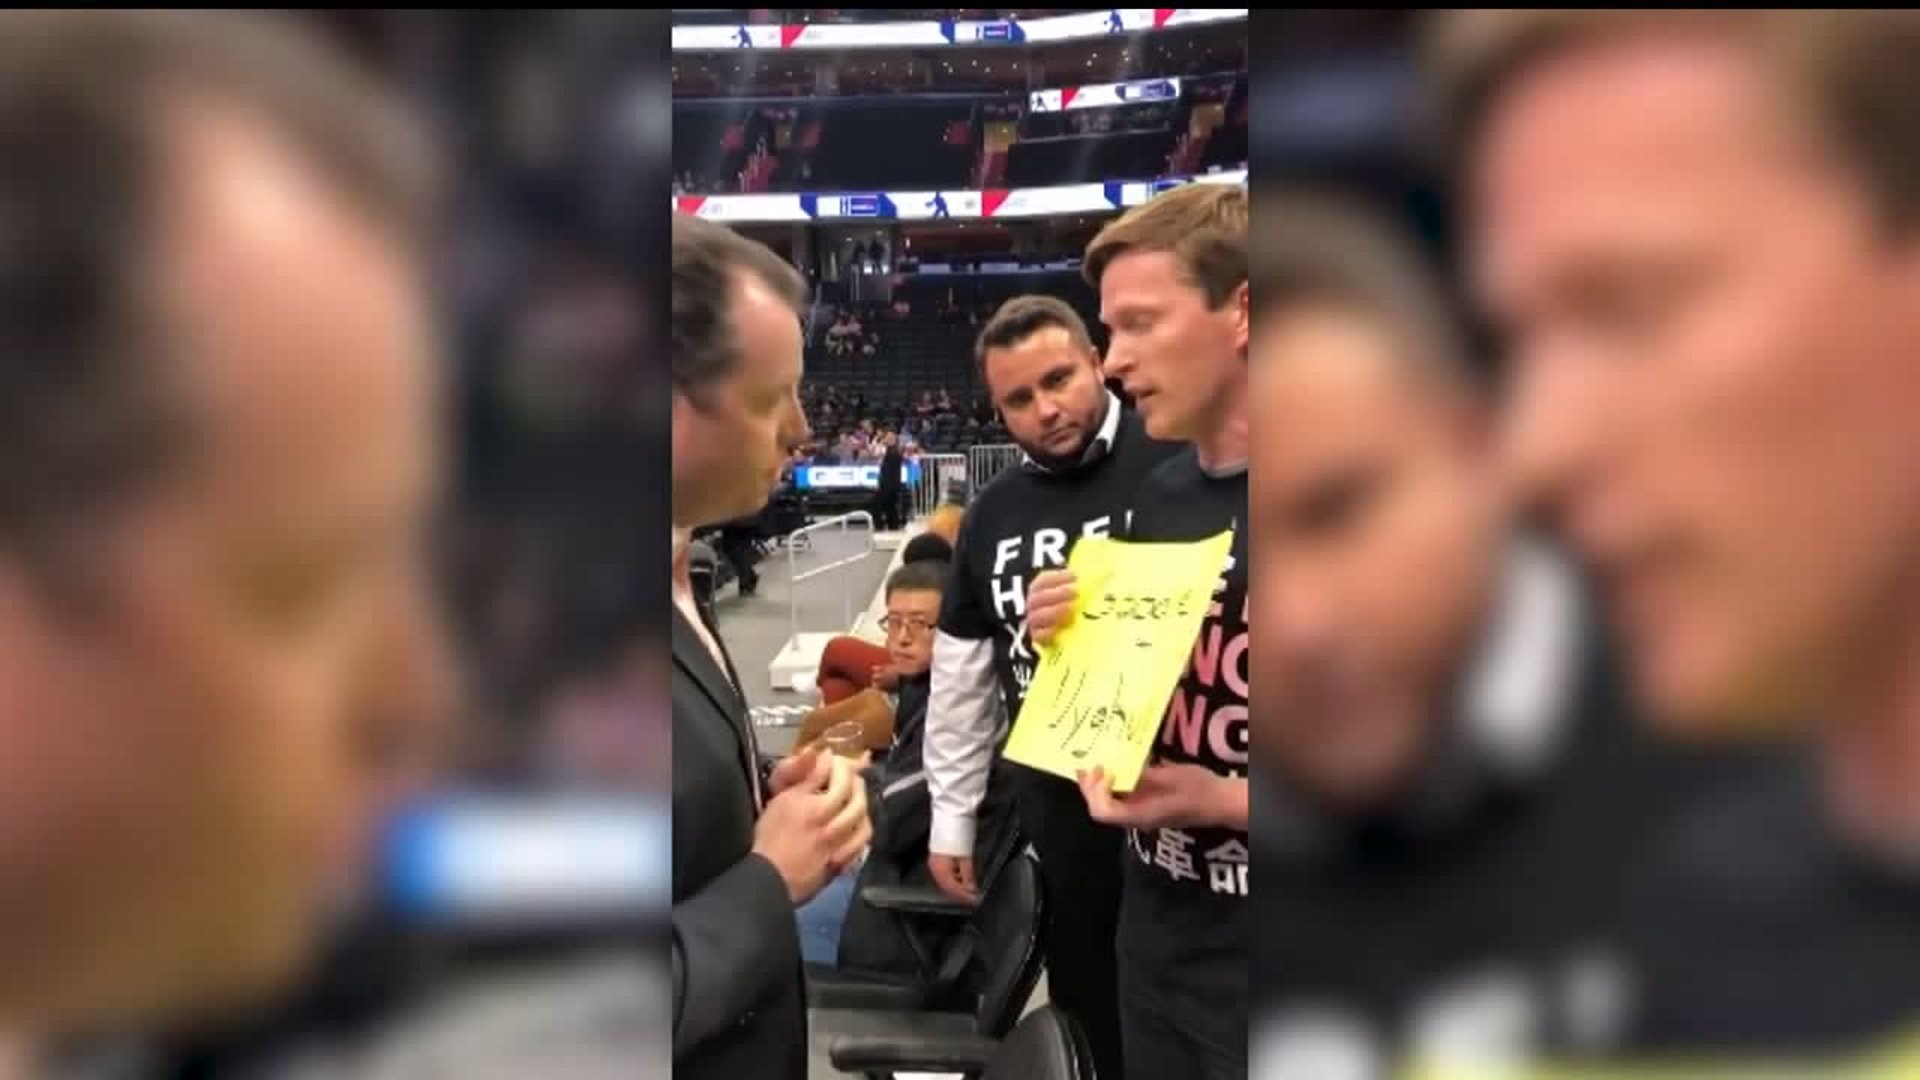 Protesters show support for Hong Kong at Wizards game